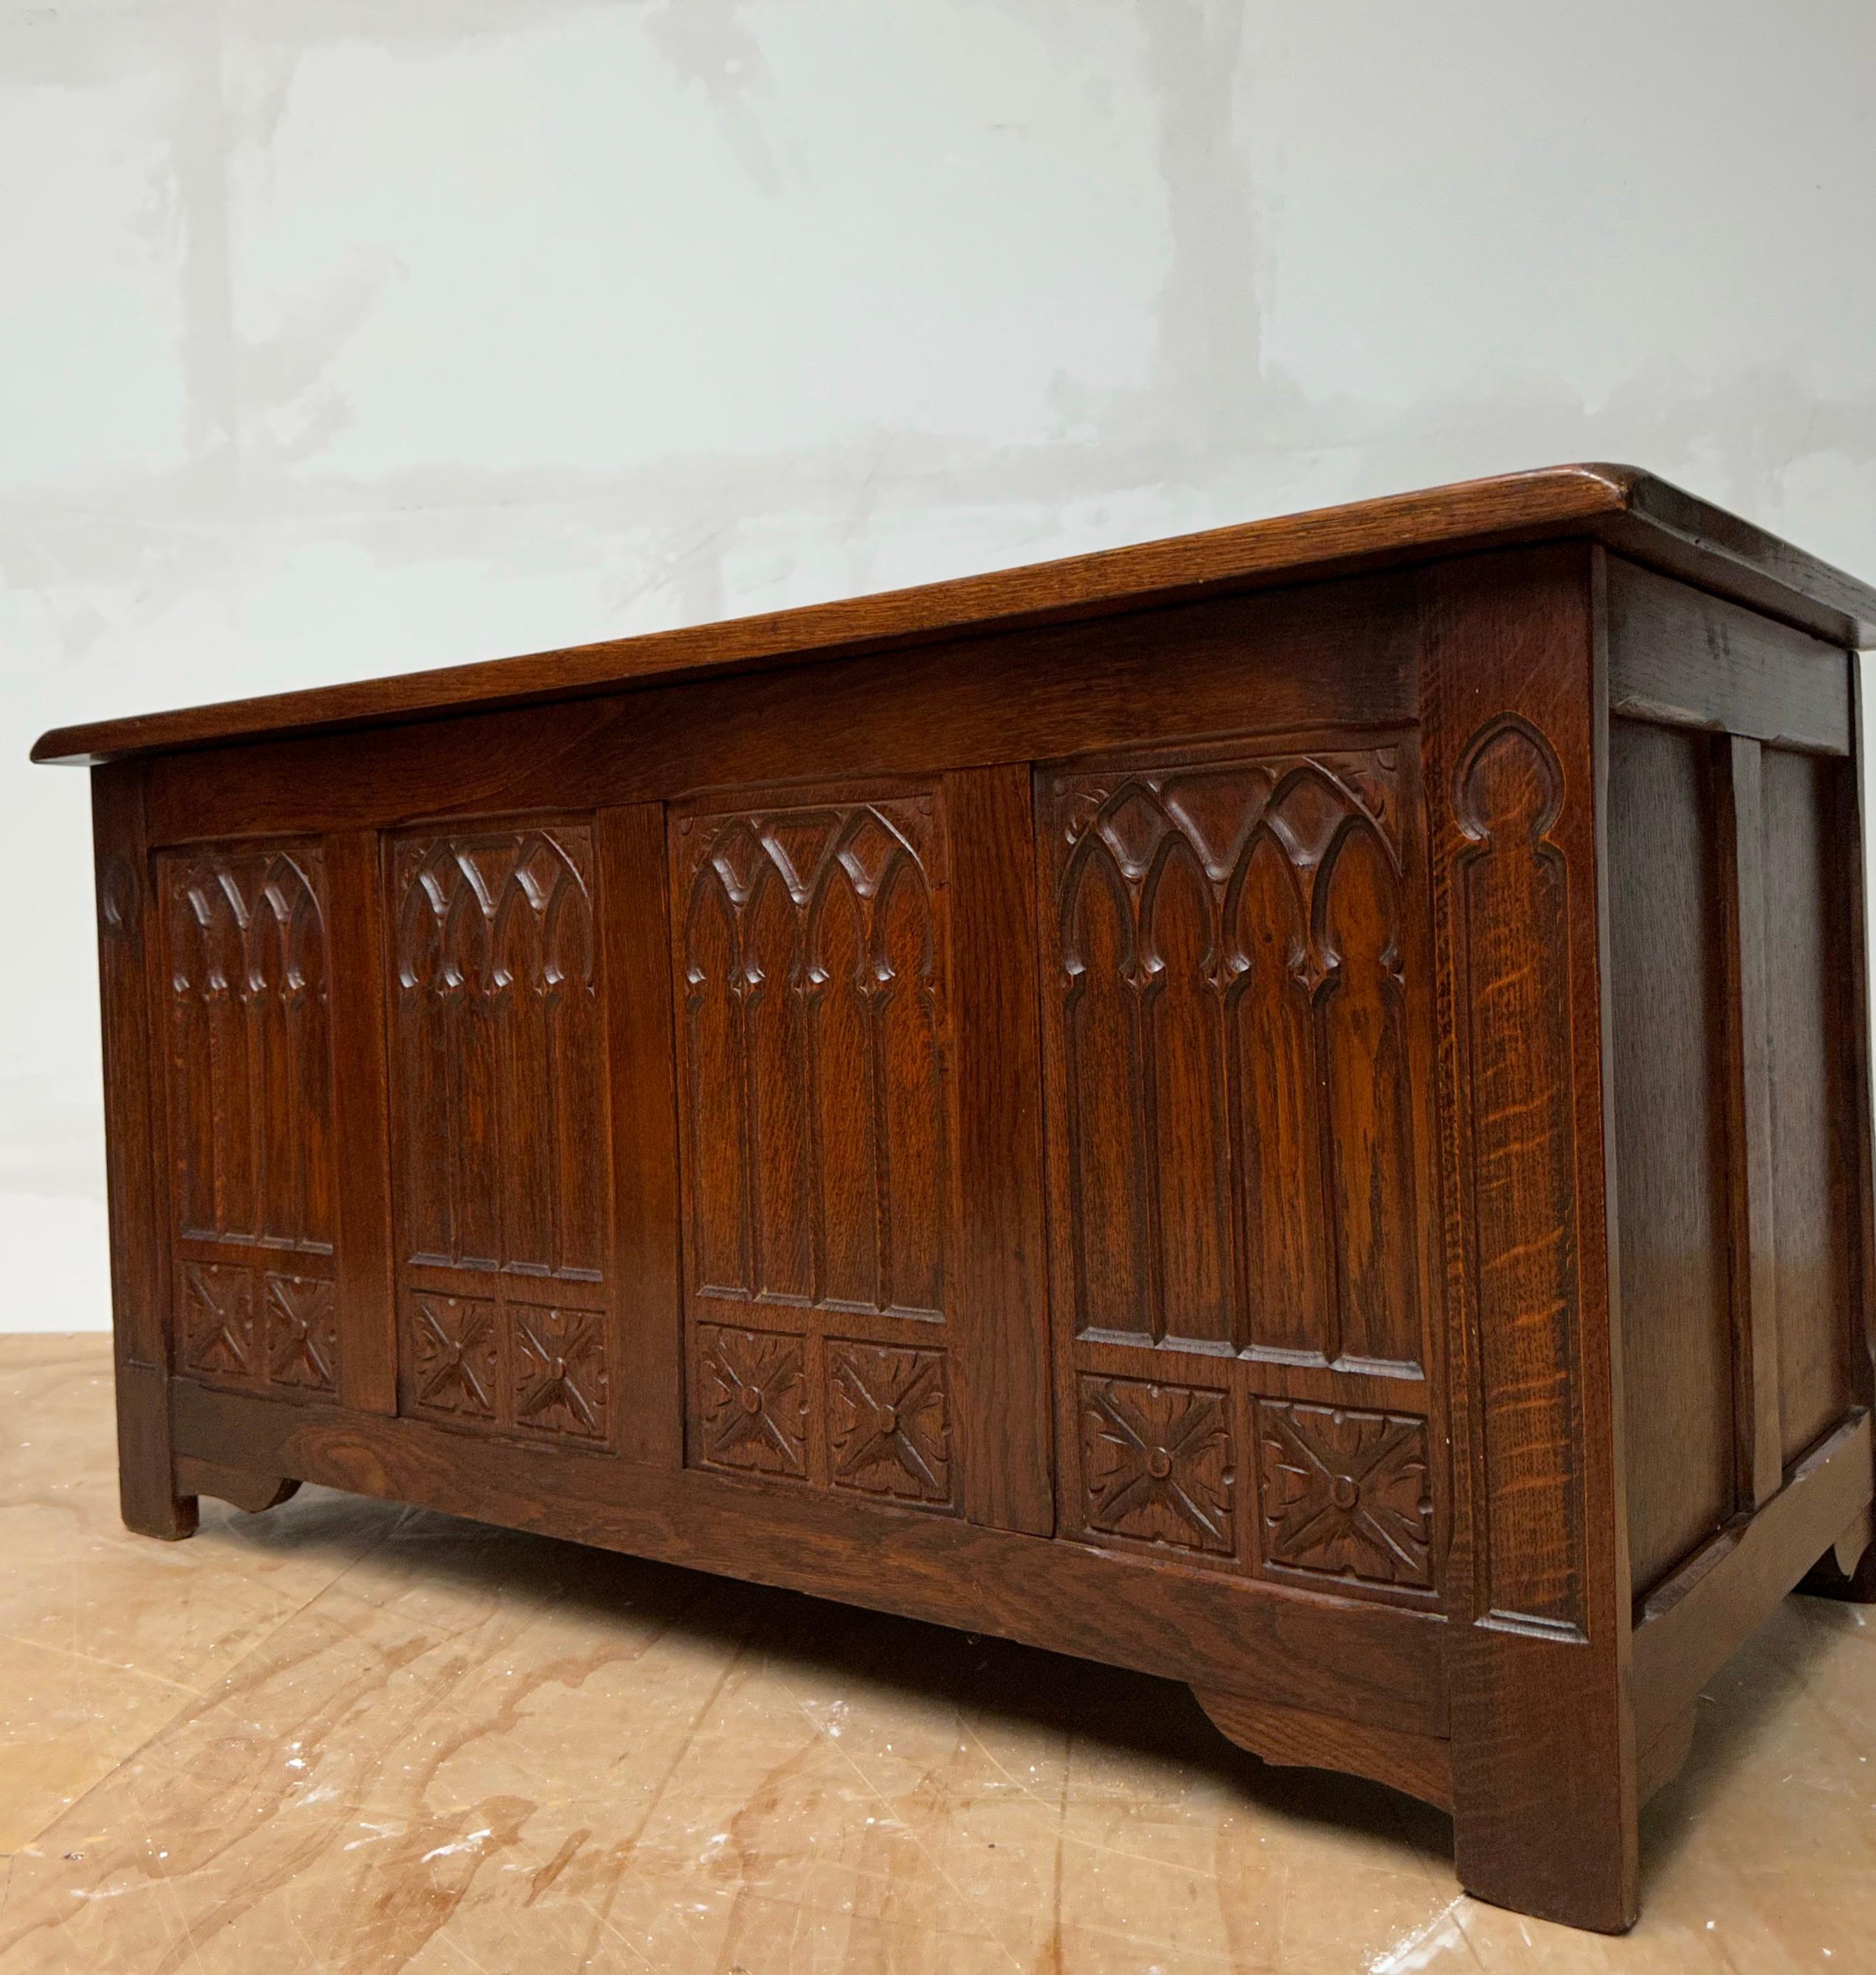 20th Century Stunning & Quality Carved Gothic Revival Blanket Chest with Church Window Panels